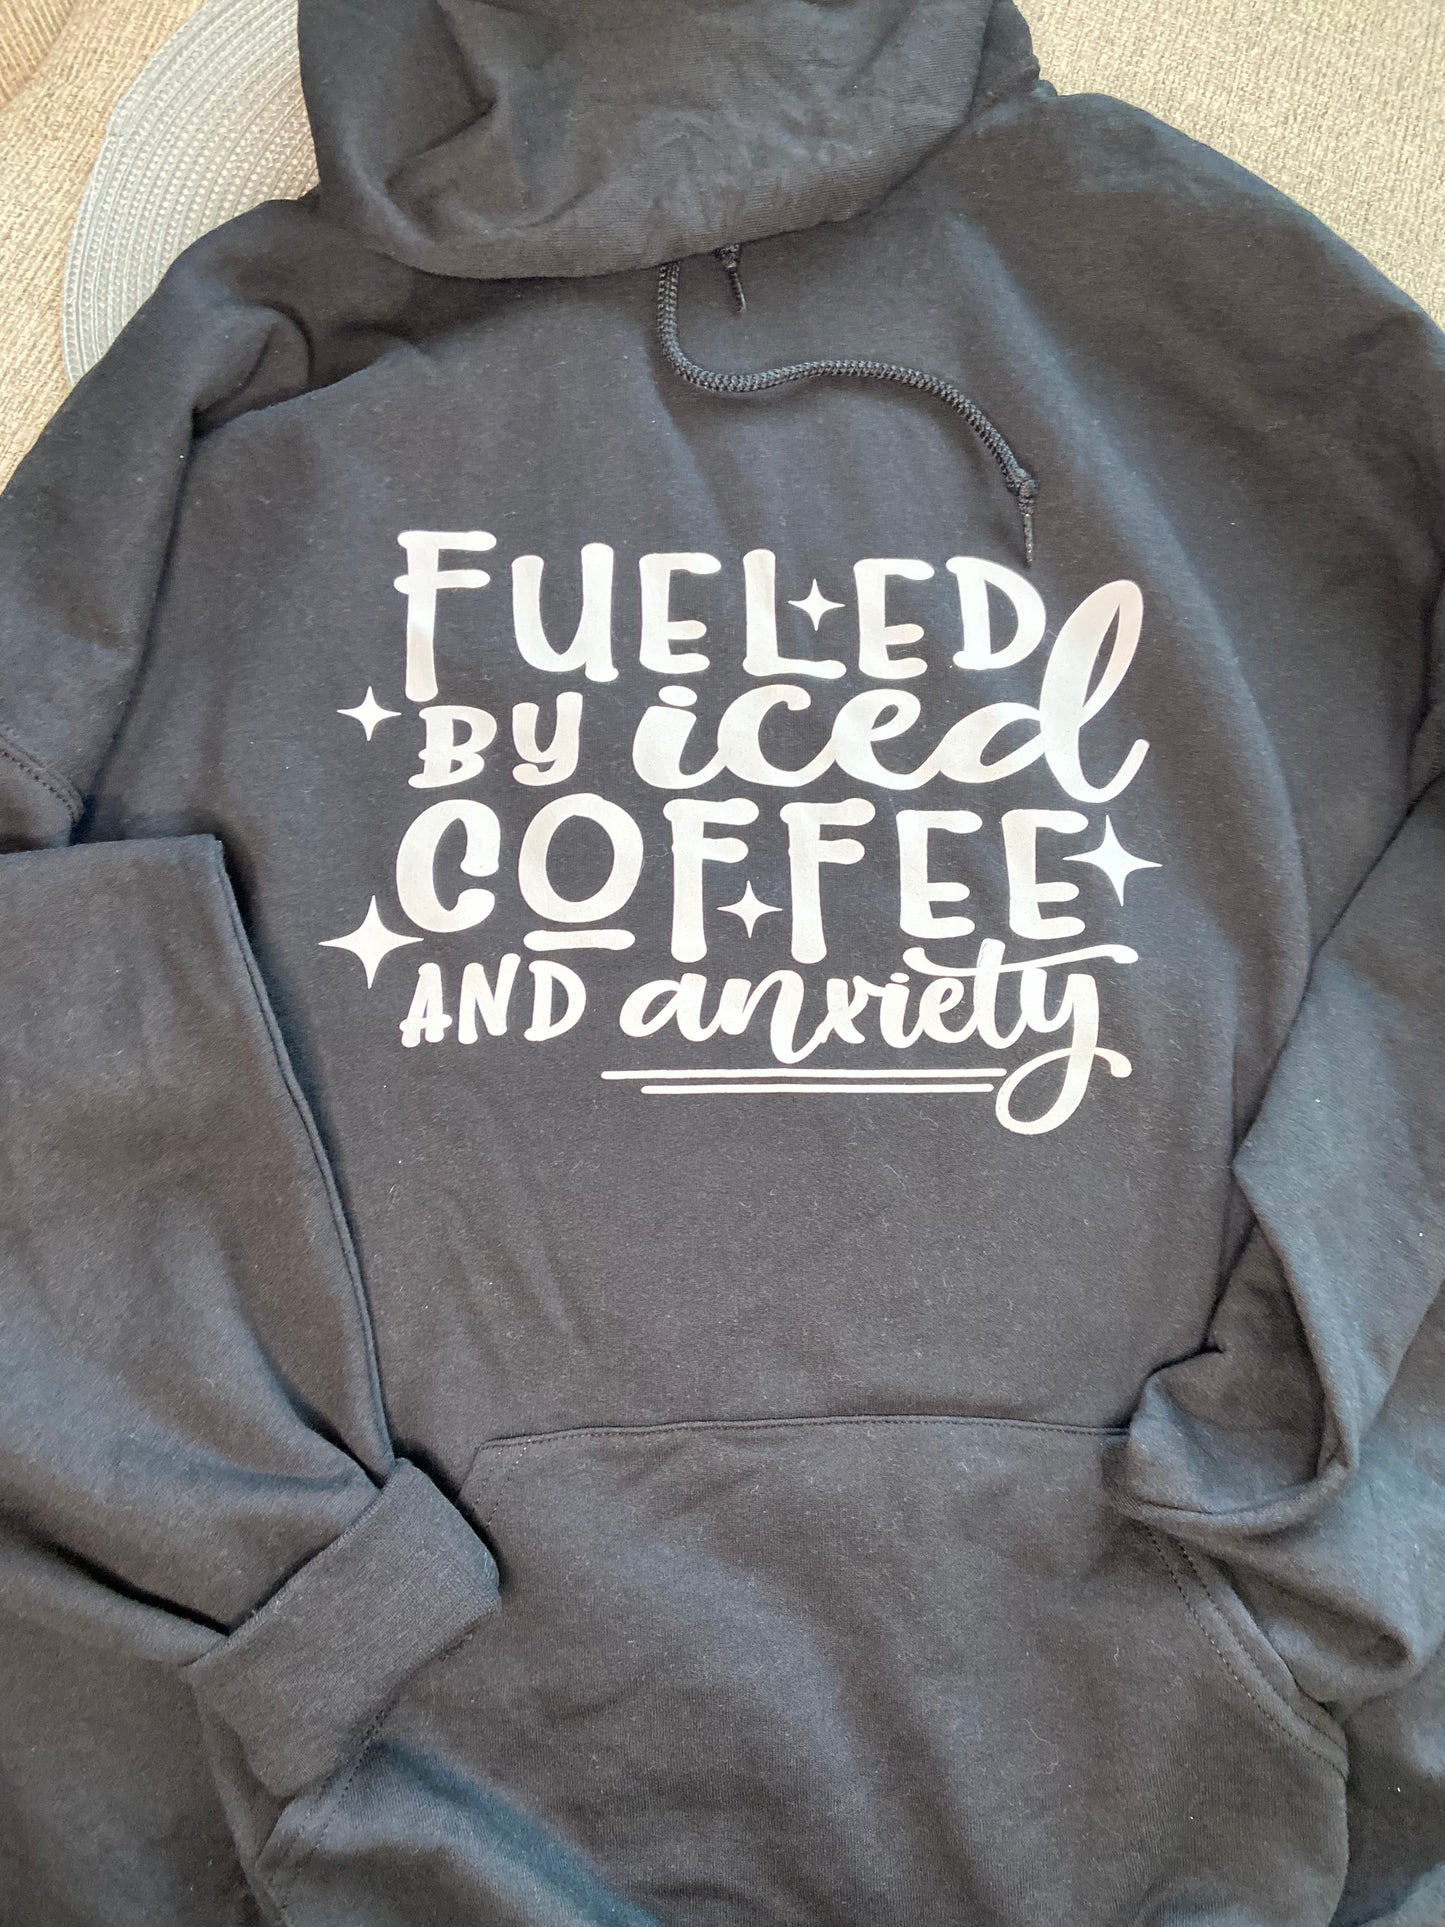 Fueled by Iced Coffee and Anxiety Tee shirt, or Hoodie sweatshirt, Comfy- relaxed fit, great gift